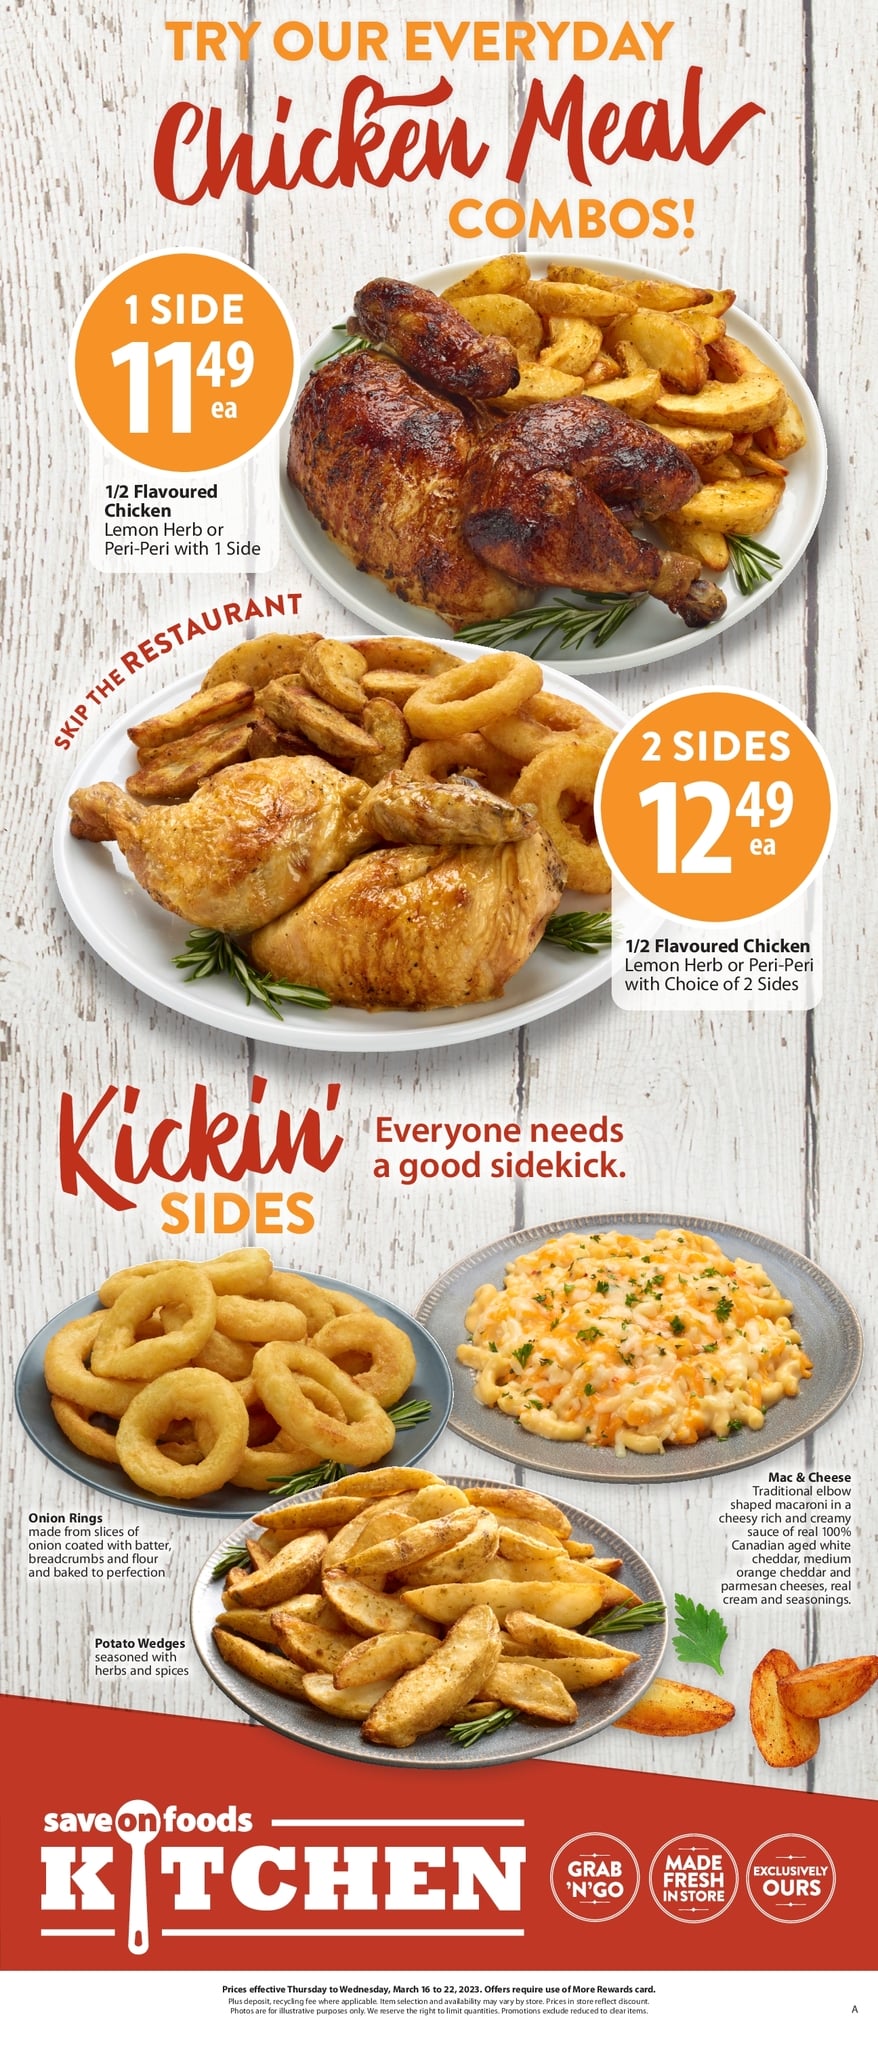 Save-On-Foods - Weekly Flyer Specials - Page 9